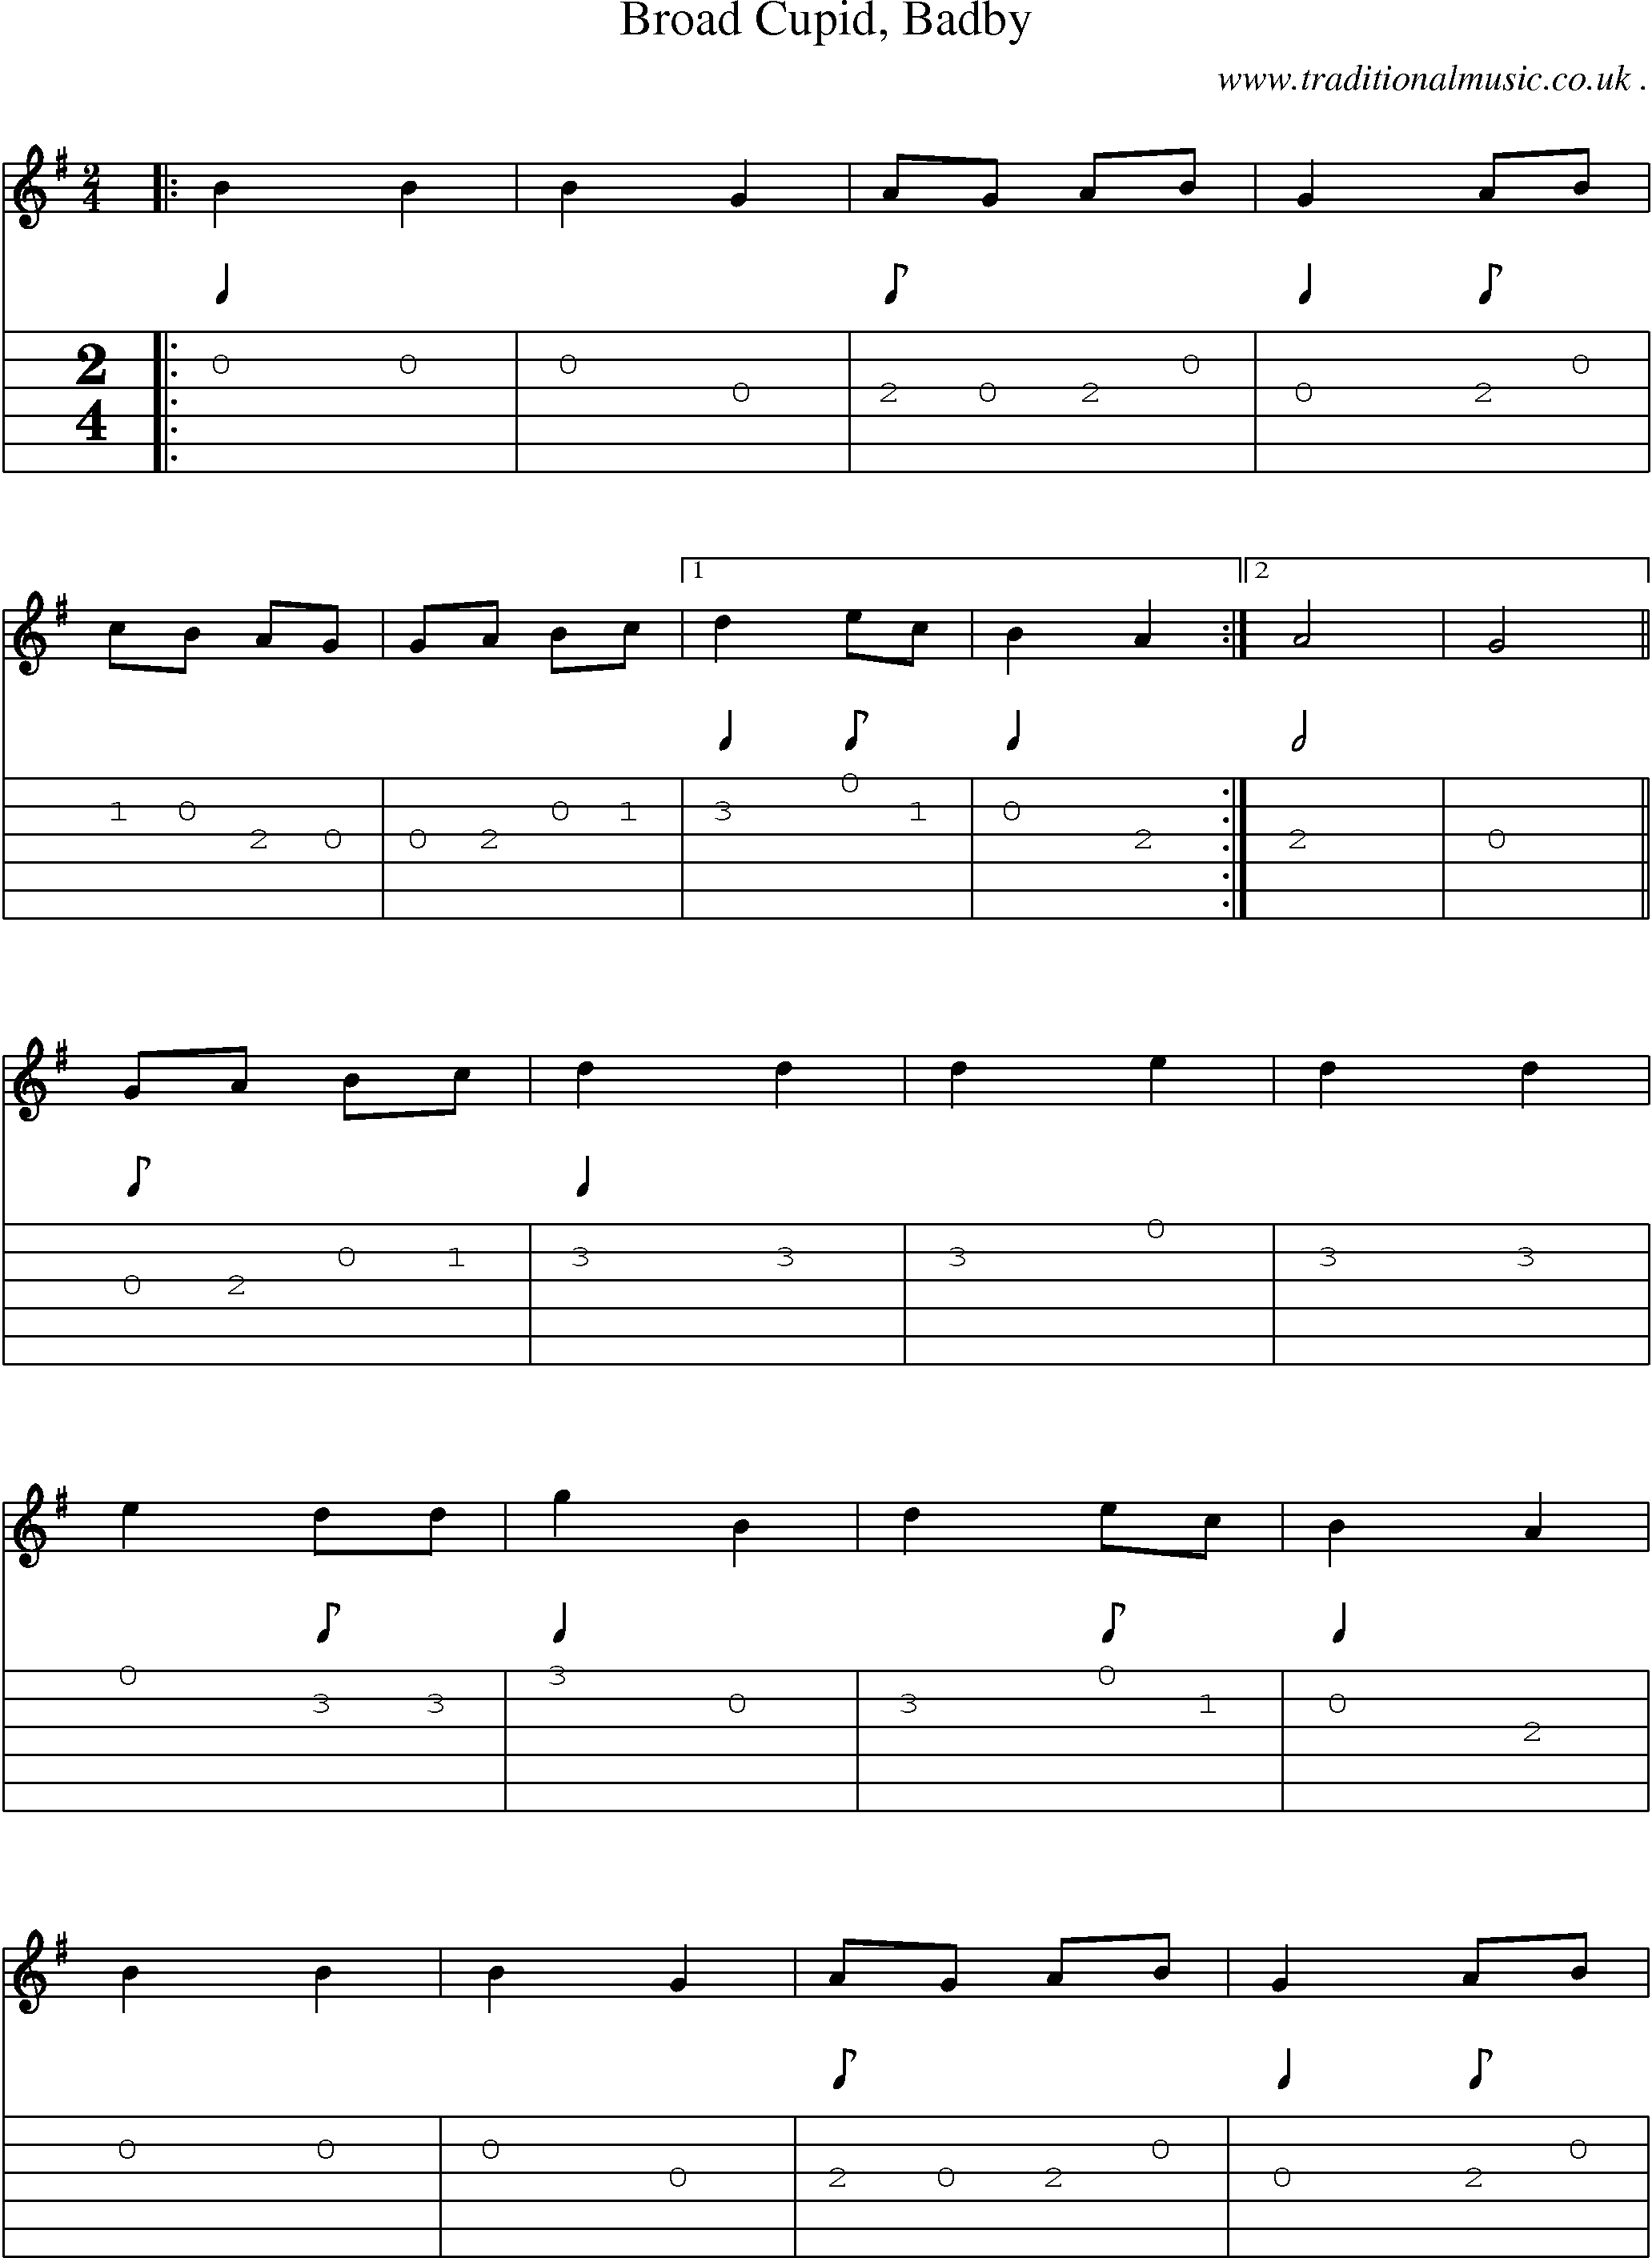 Sheet-Music and Guitar Tabs for Broad Cupid Badby